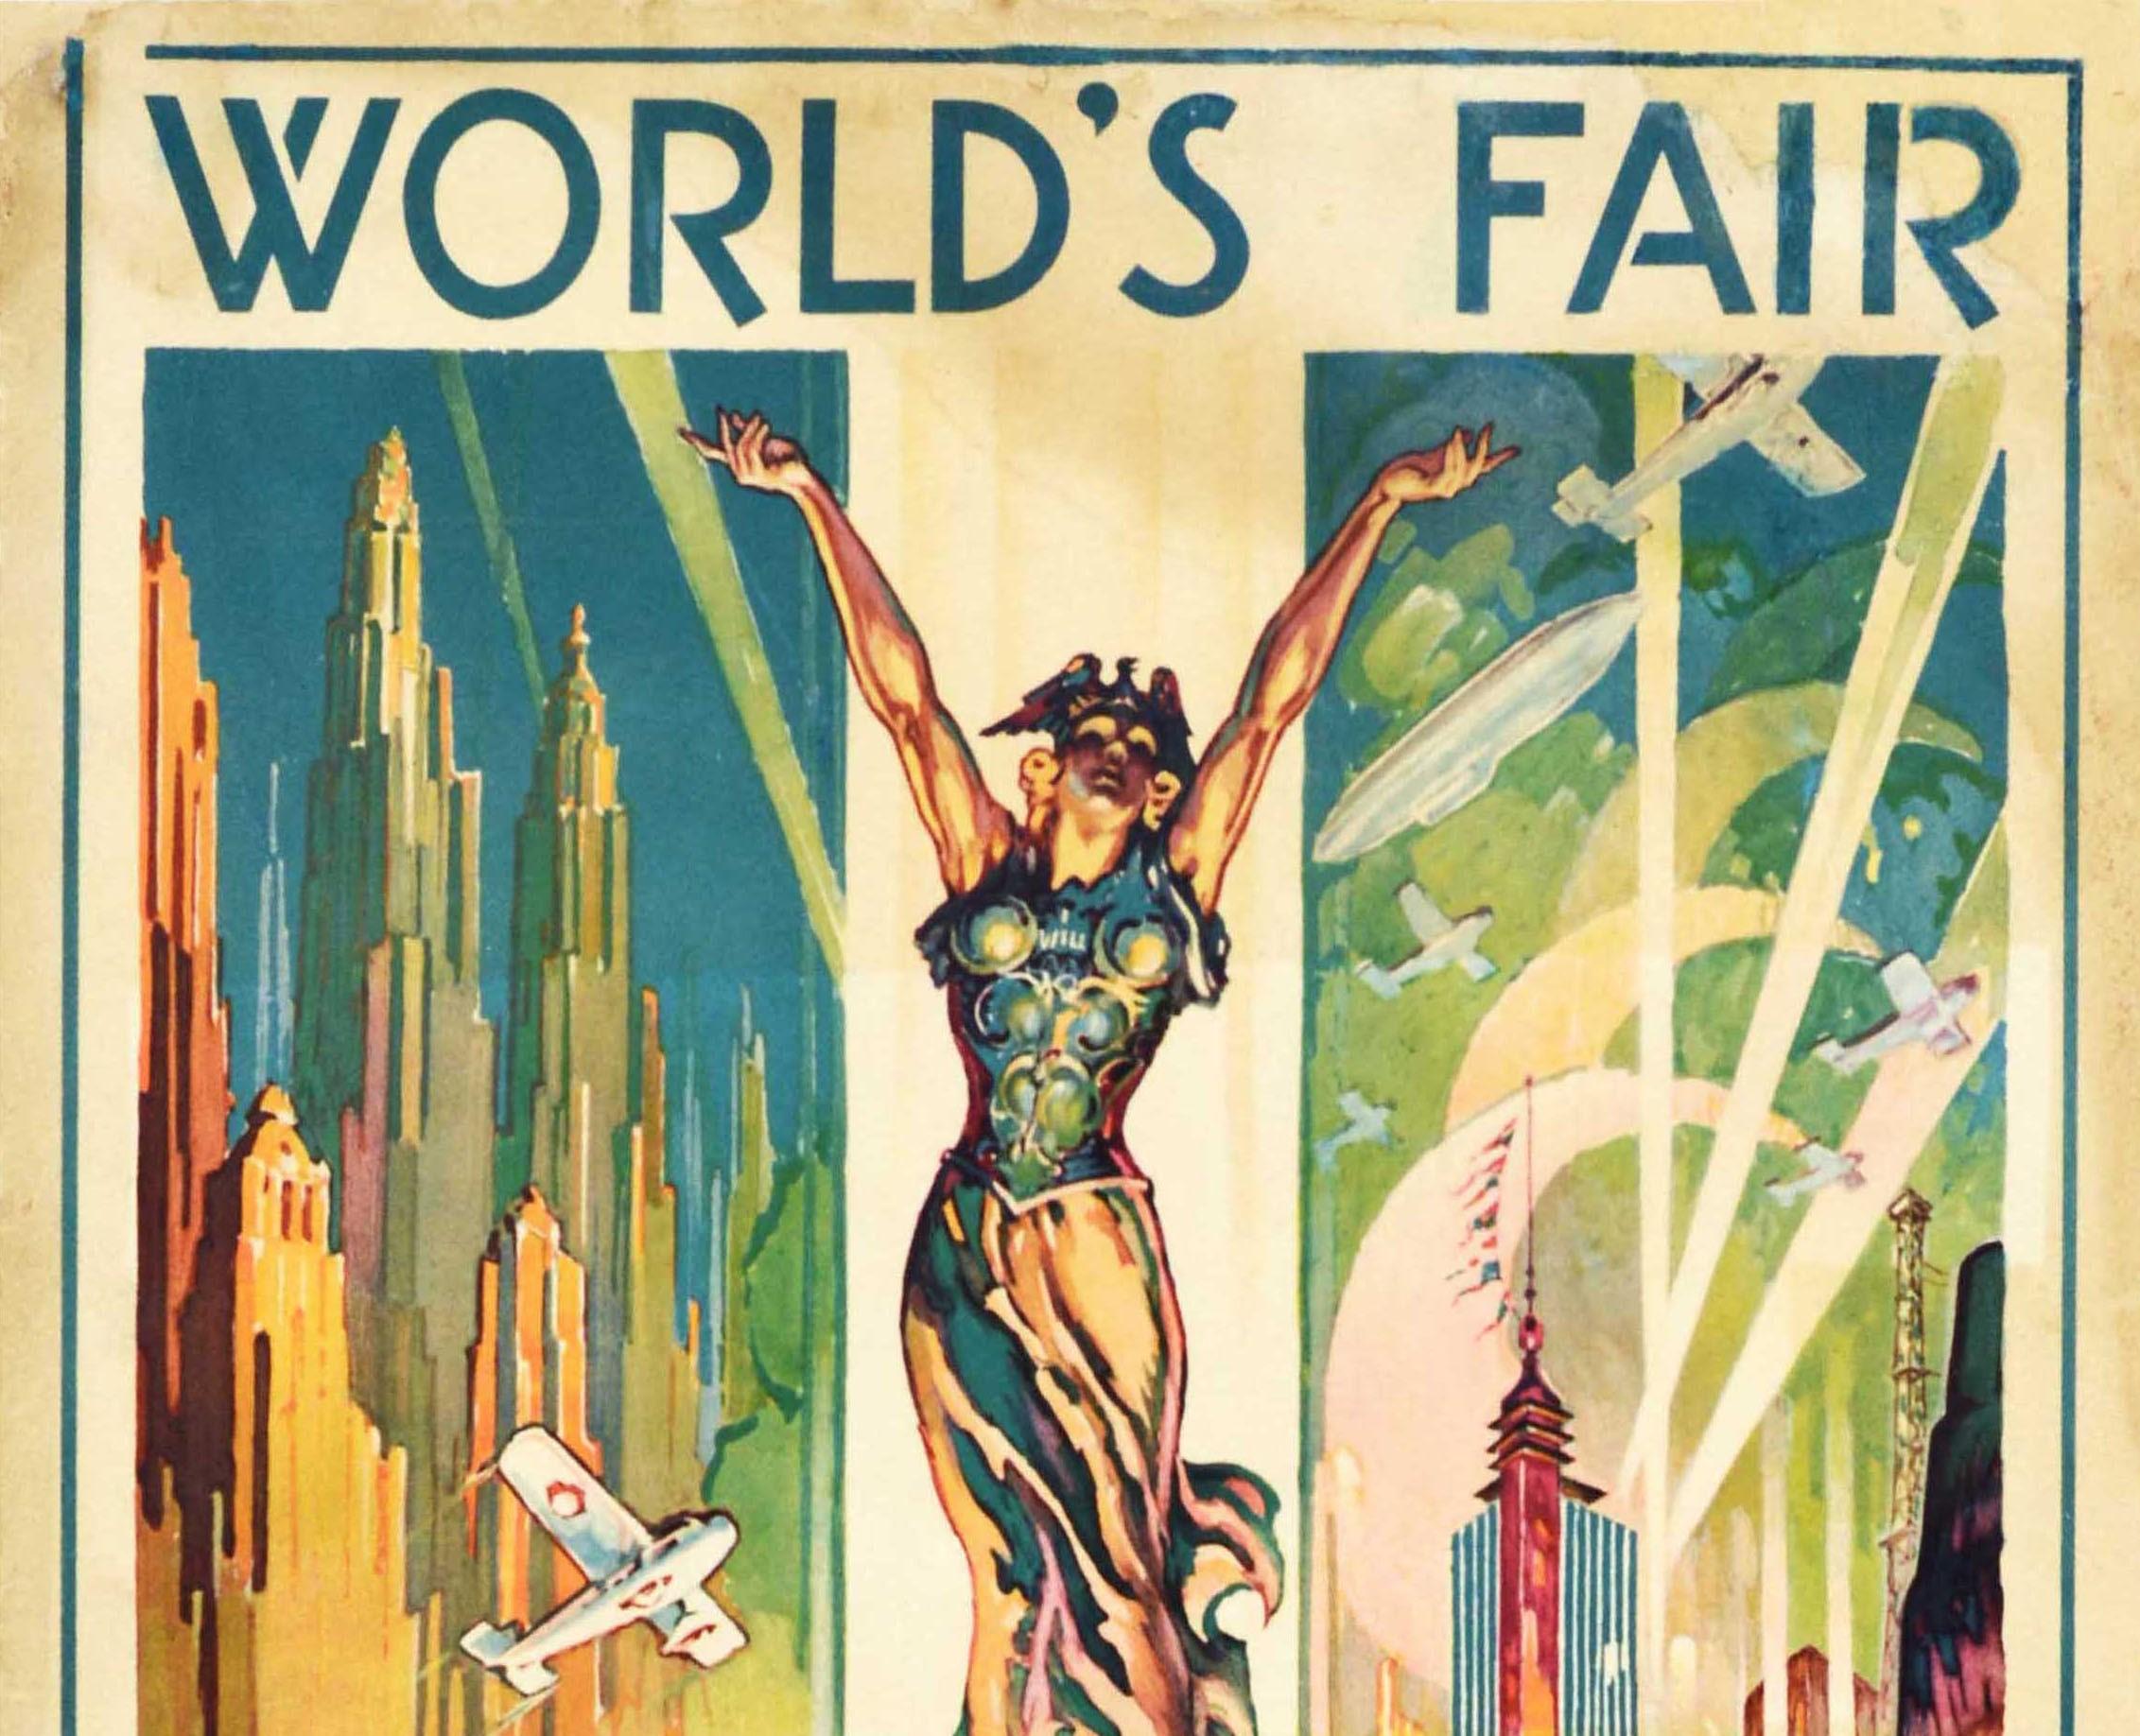 Original vintage poster for the World's Fair Chicago 1833 A Century of Progress 1933 international exposition held from 27 May to 1 November 1933 under the theme of Technological Innovation with the motto Science Finds, Industry Applies, Man